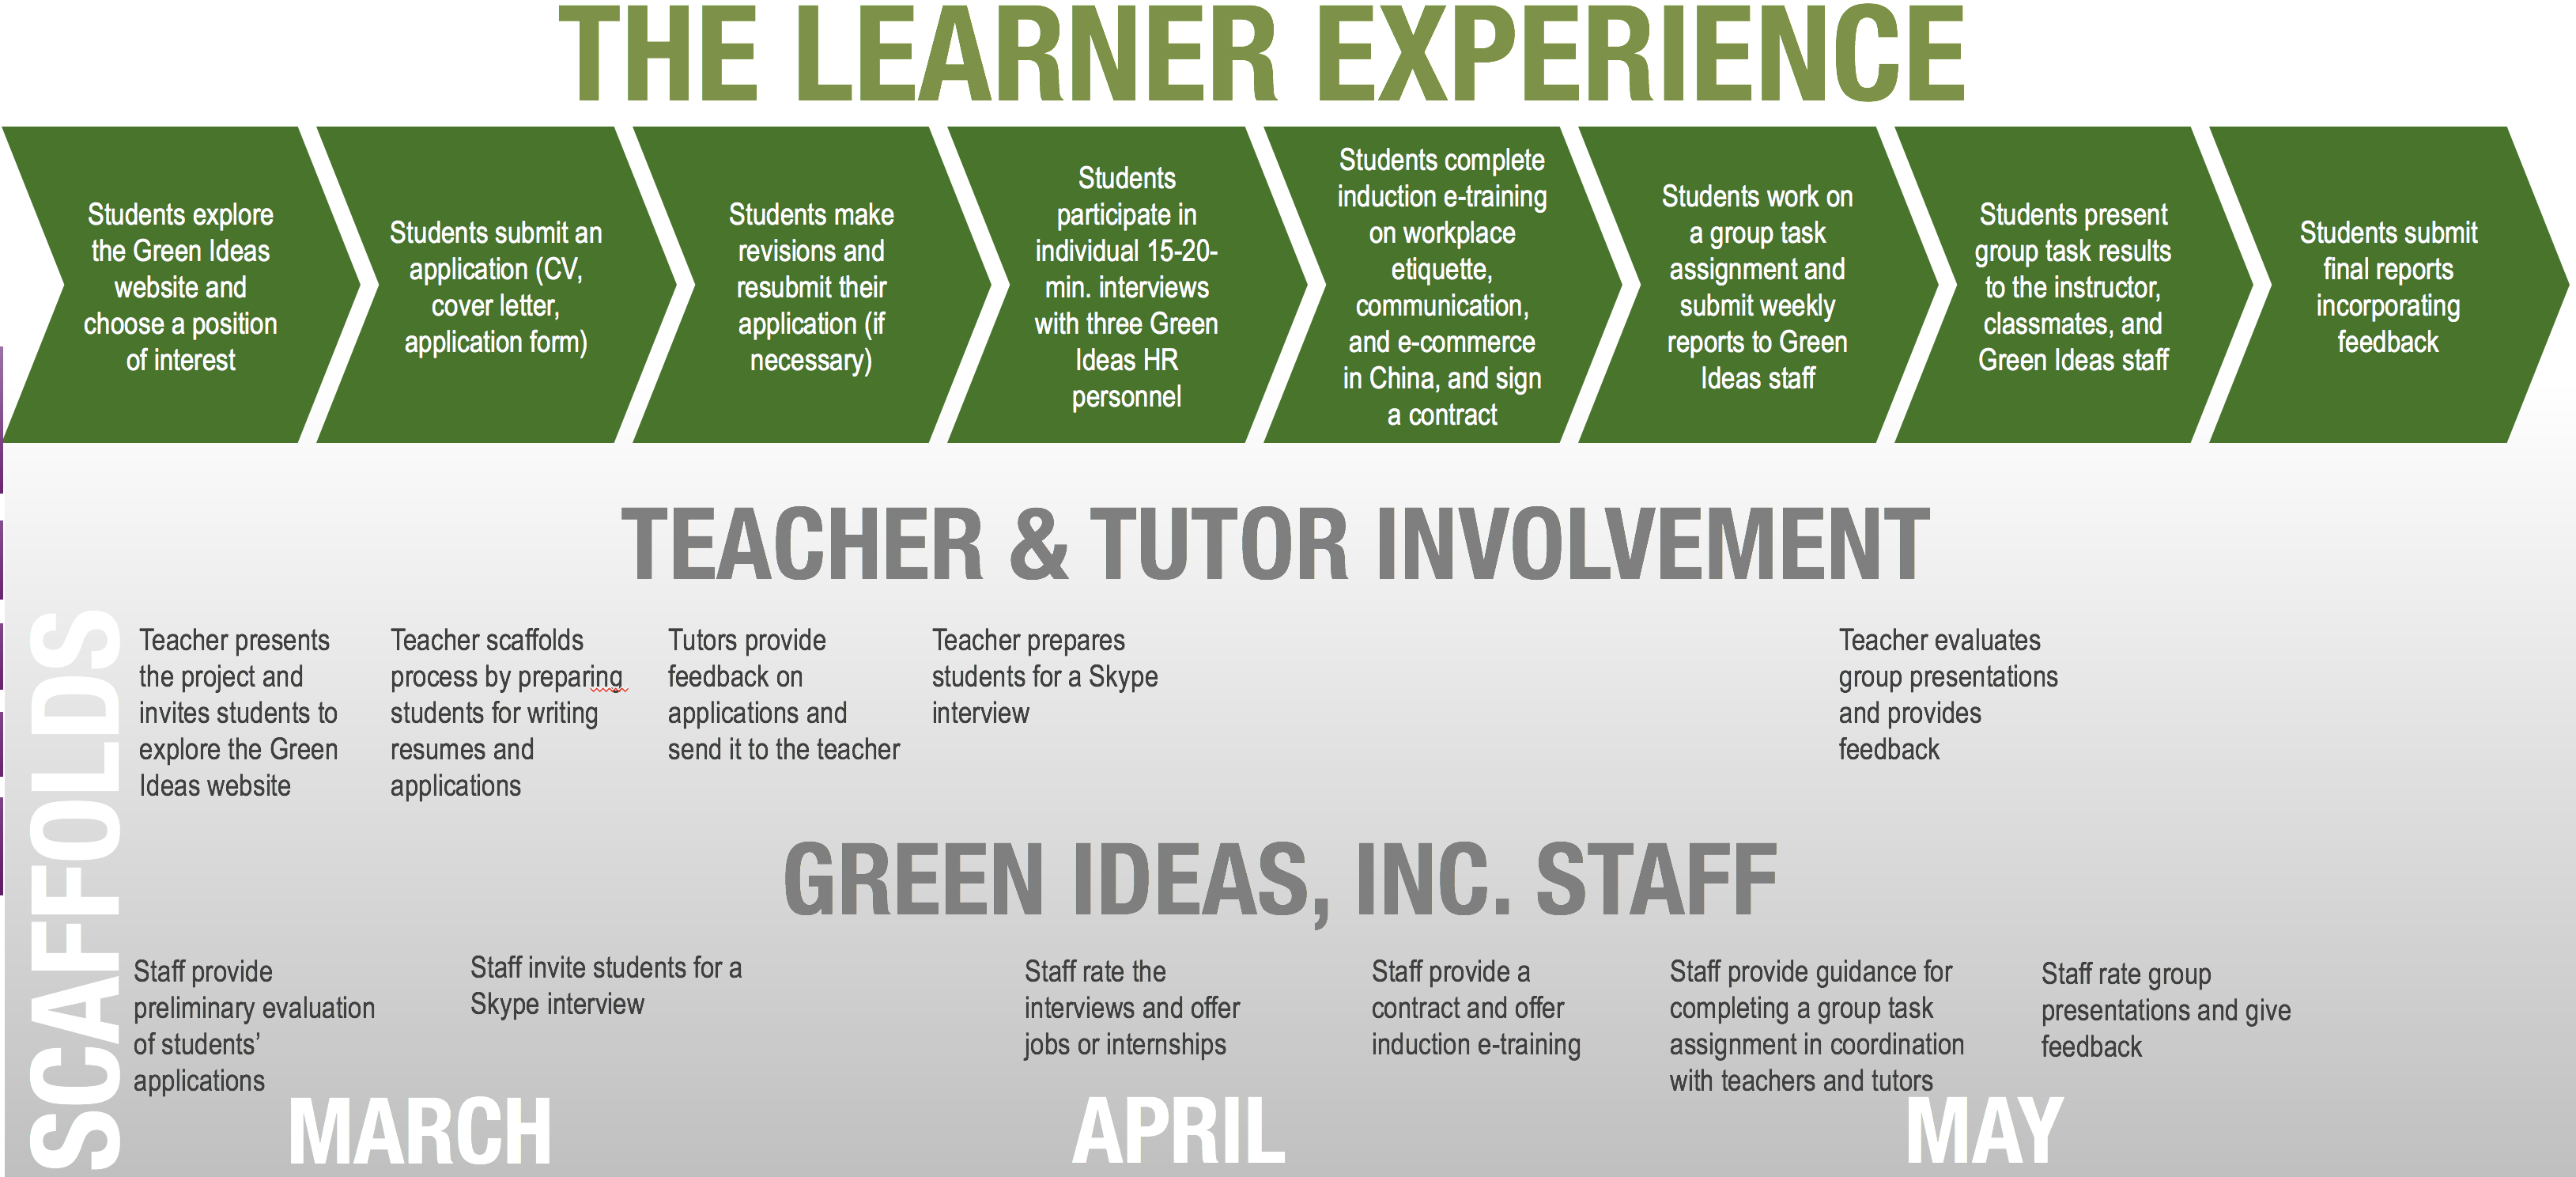 The different phases in the learner experience of the simulation.